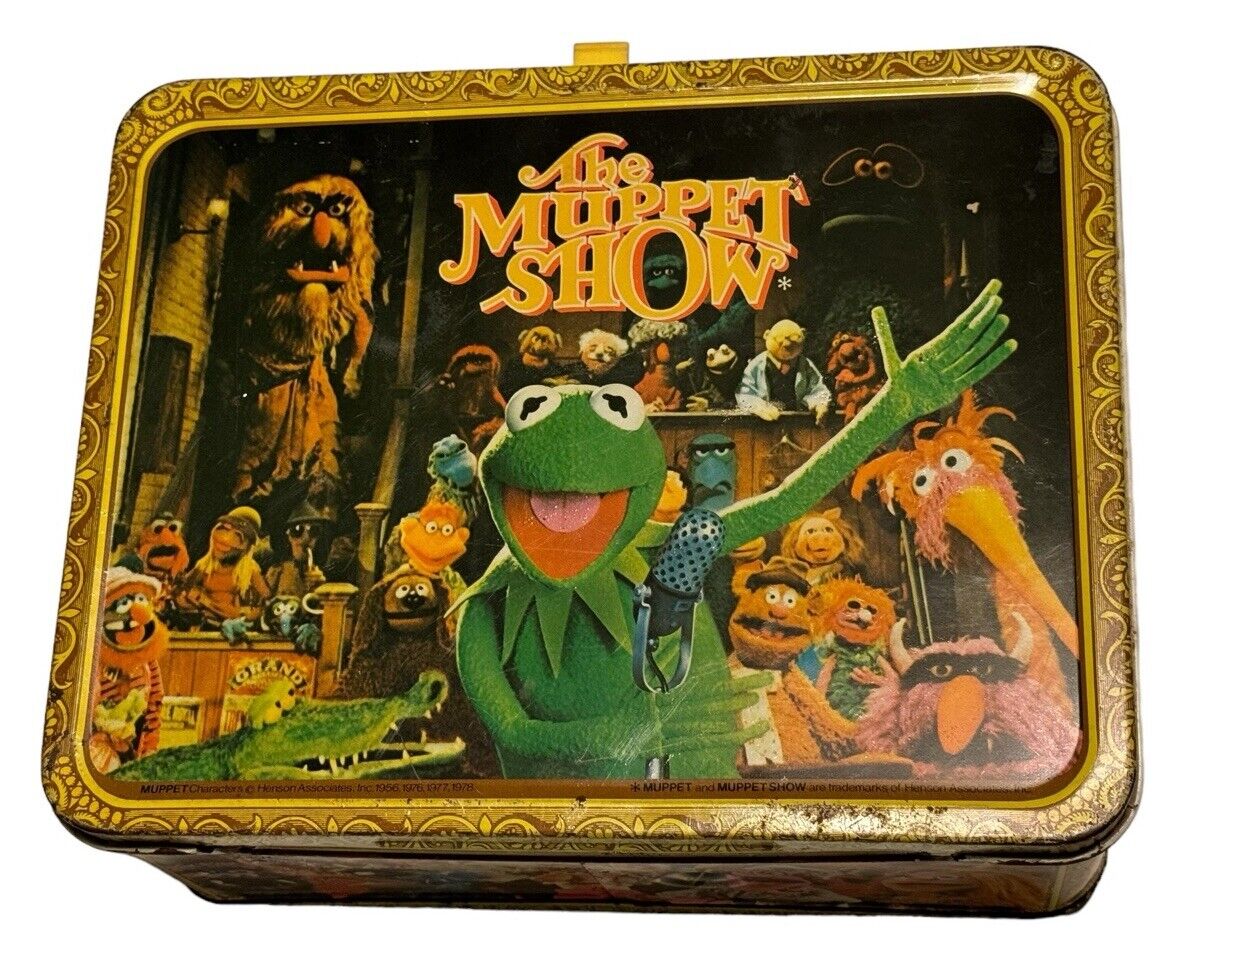 Vintage 1978 Jim Henson’s The Muppet Show Metal Lunchbox C7 Kermit The Frog